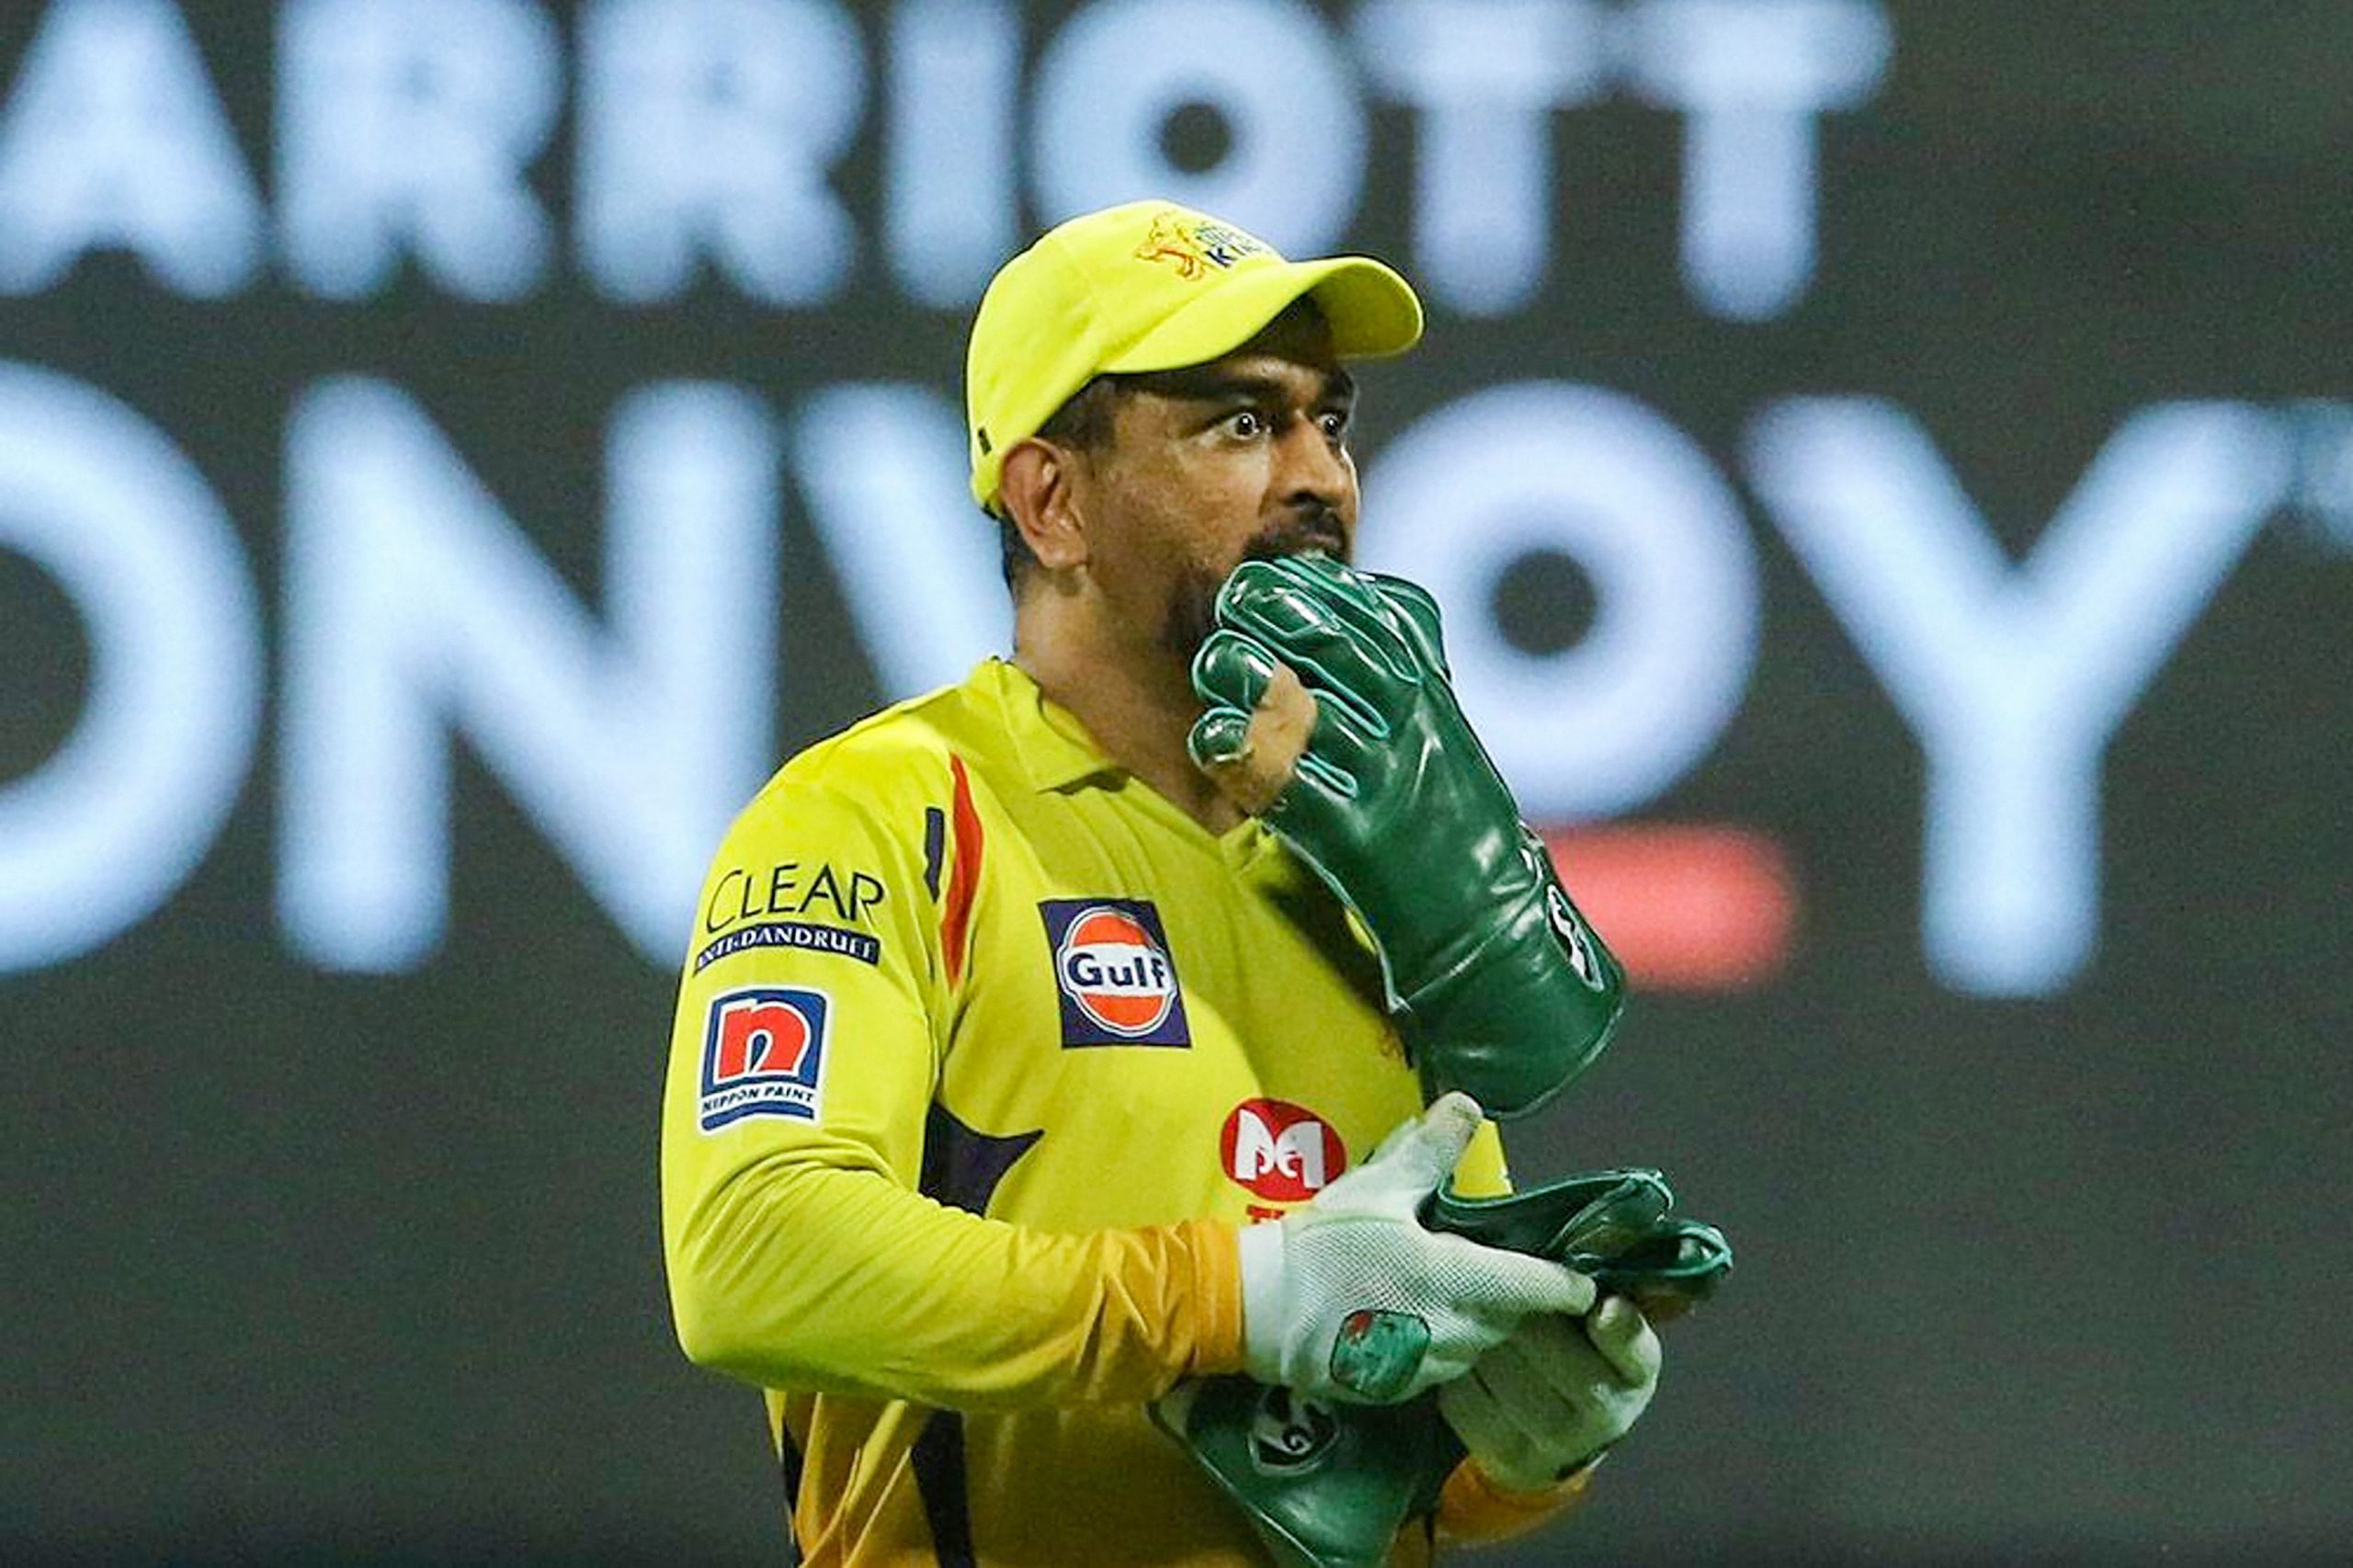 Explained: MS Dhoni’s decision to bat lower down the order